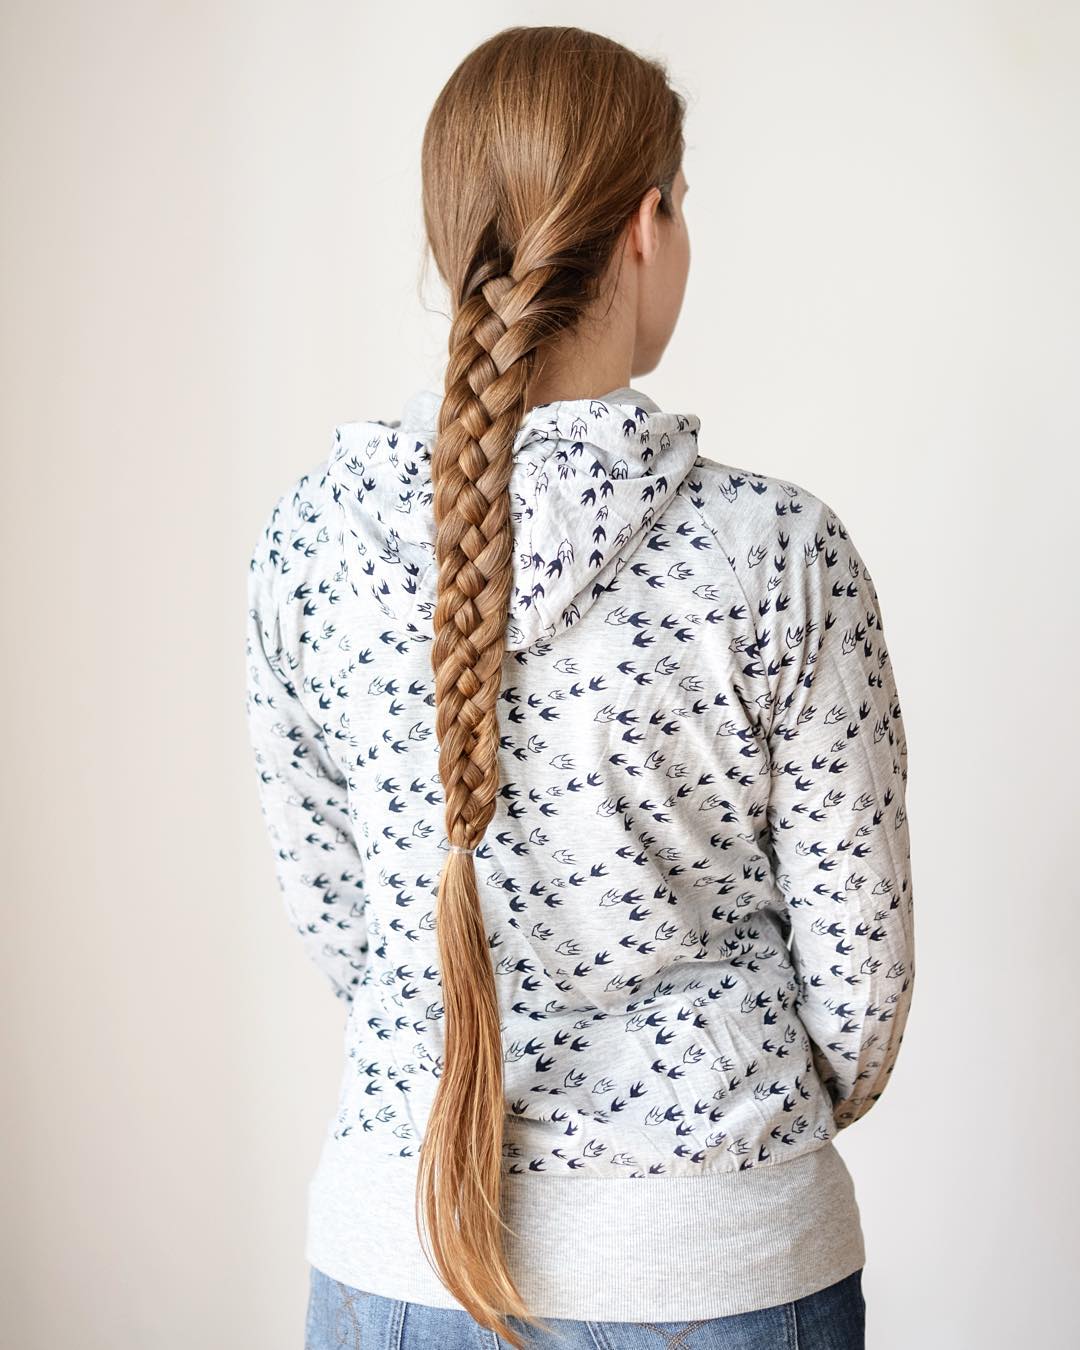 four braided hairstyle